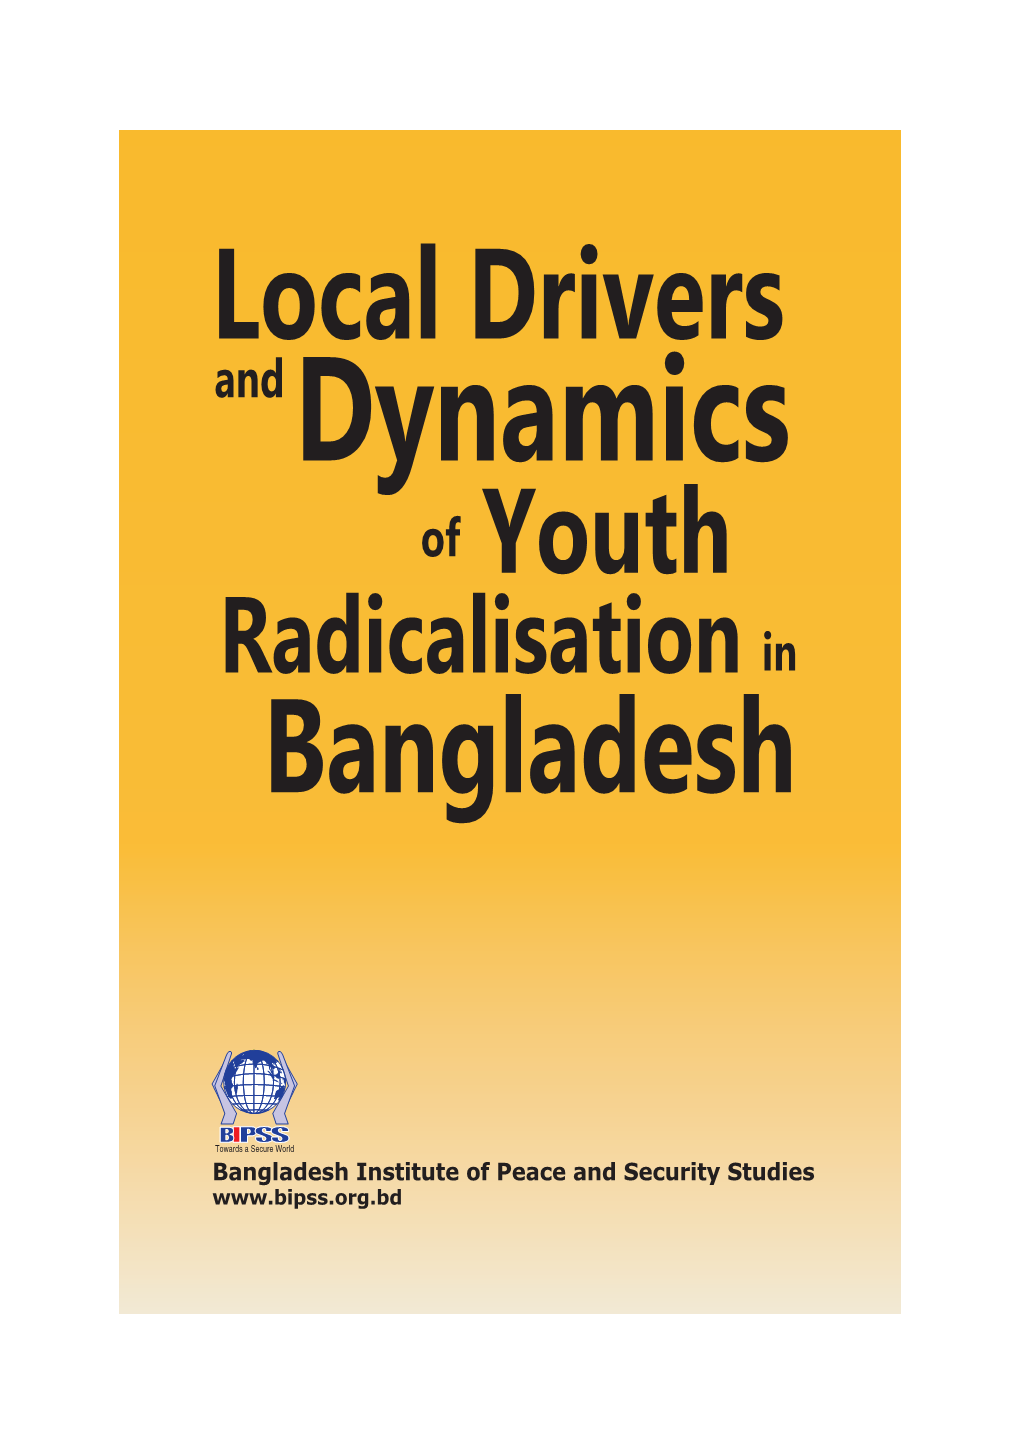 Local Drivers and Dynamics of Youth Radicalisation in Bangladesh